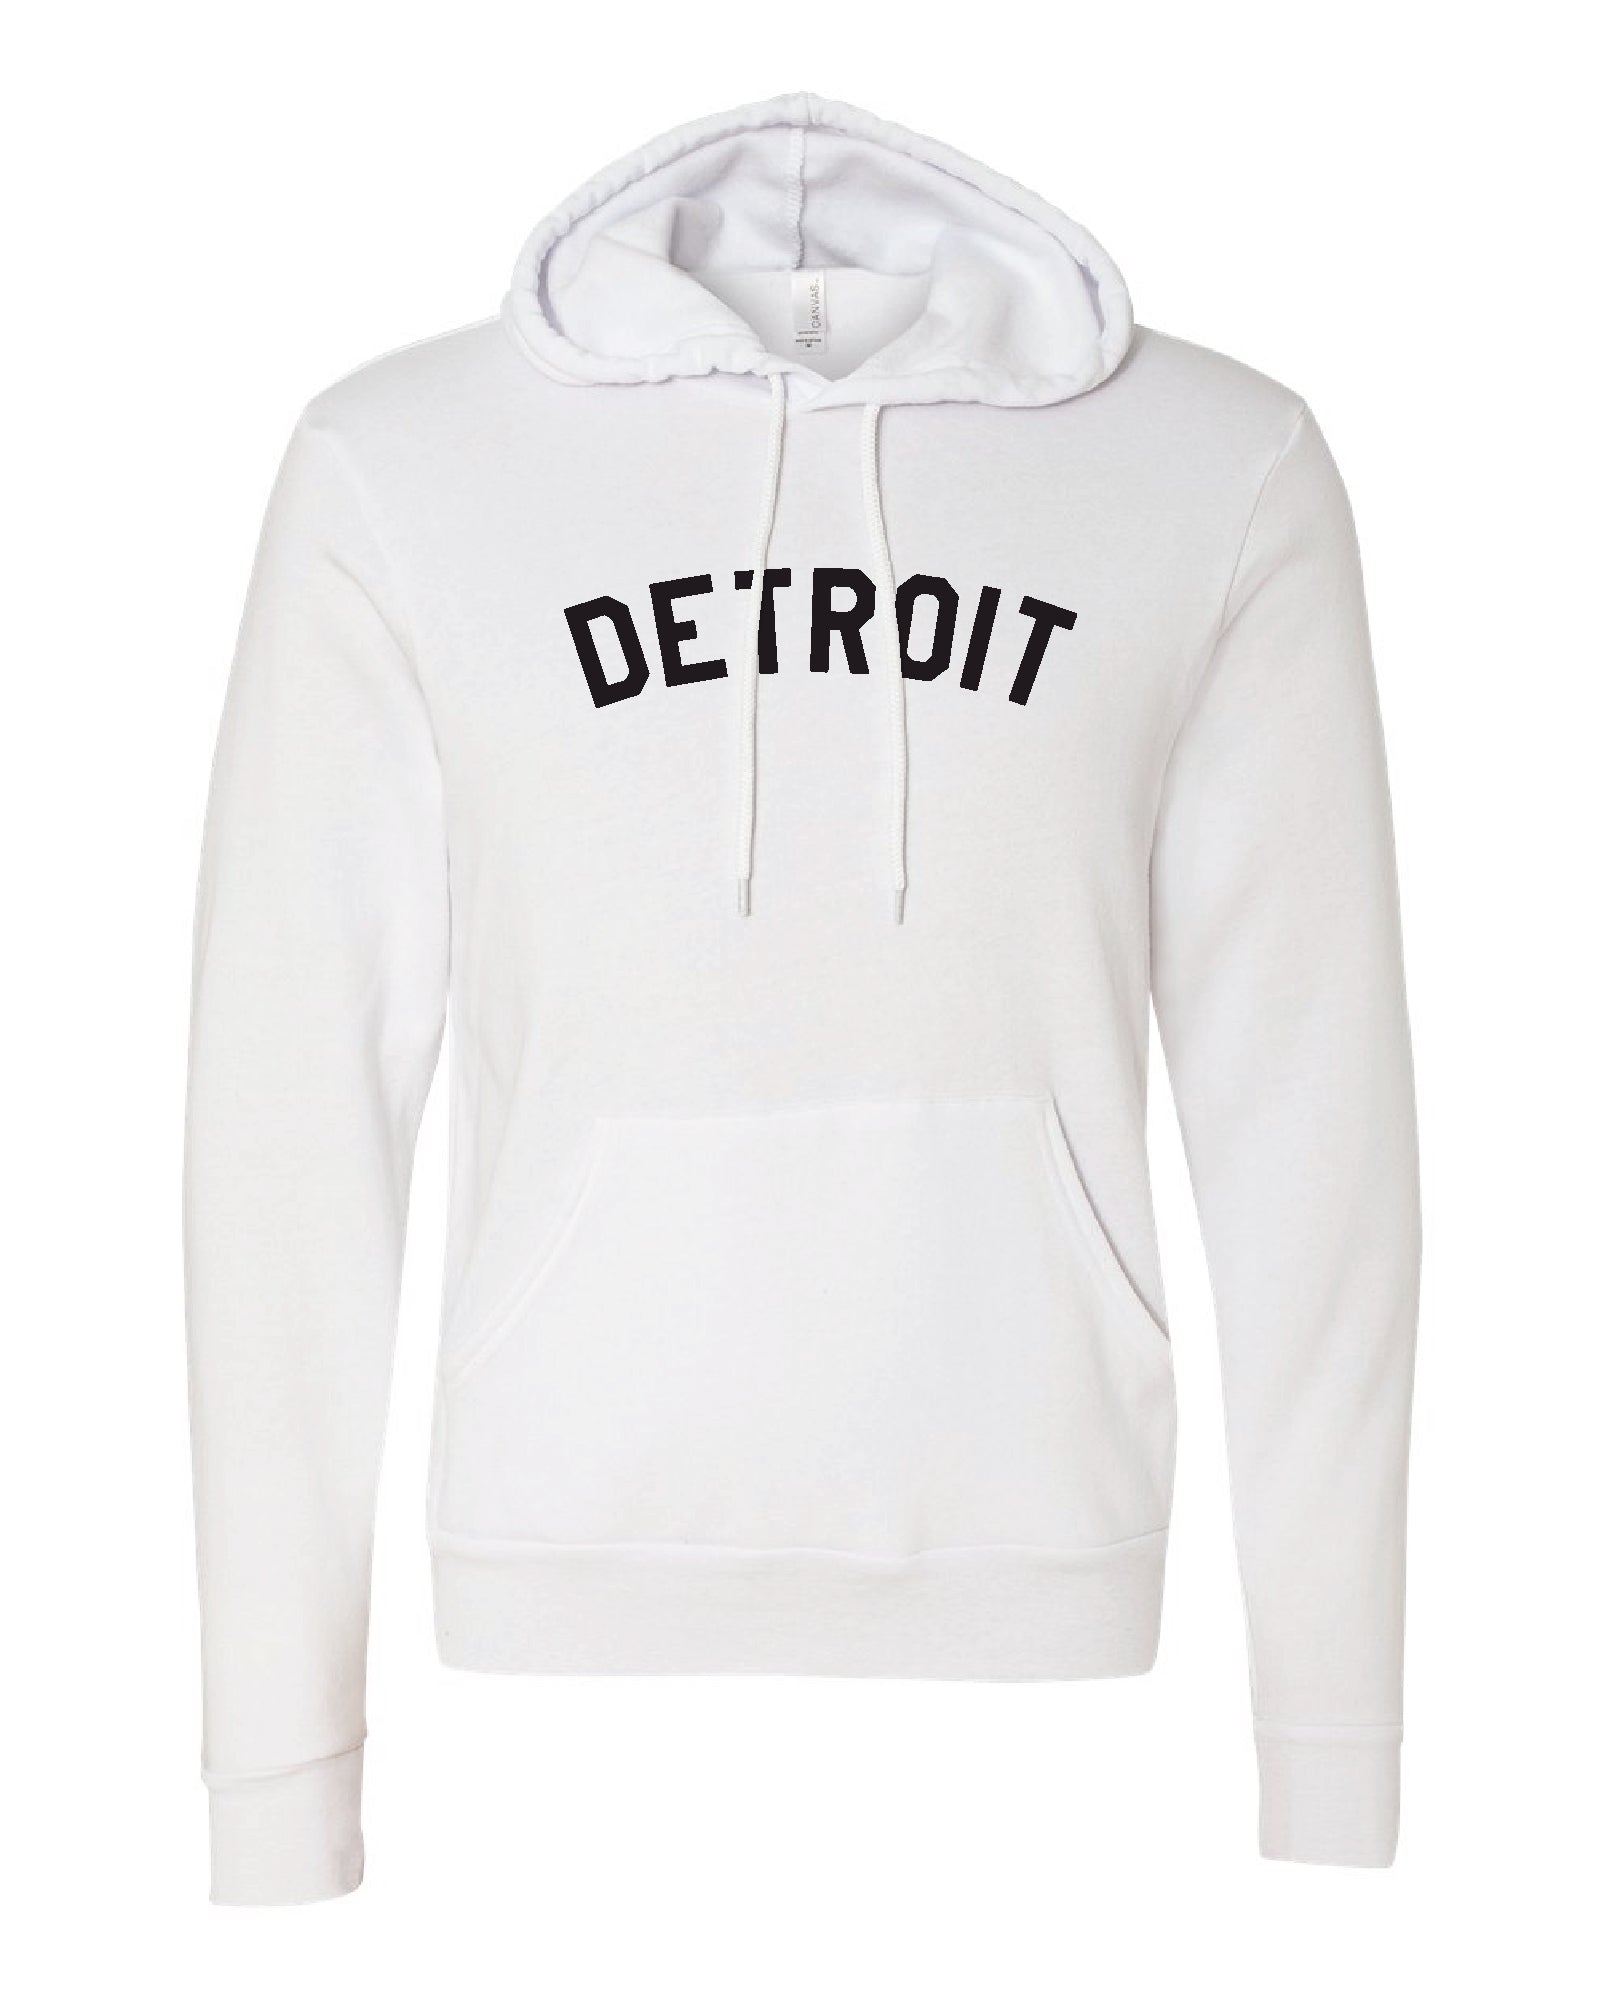 Basic Detroit - Sweaters, Hoodies & Tees - Made in Detroit - The Great ...